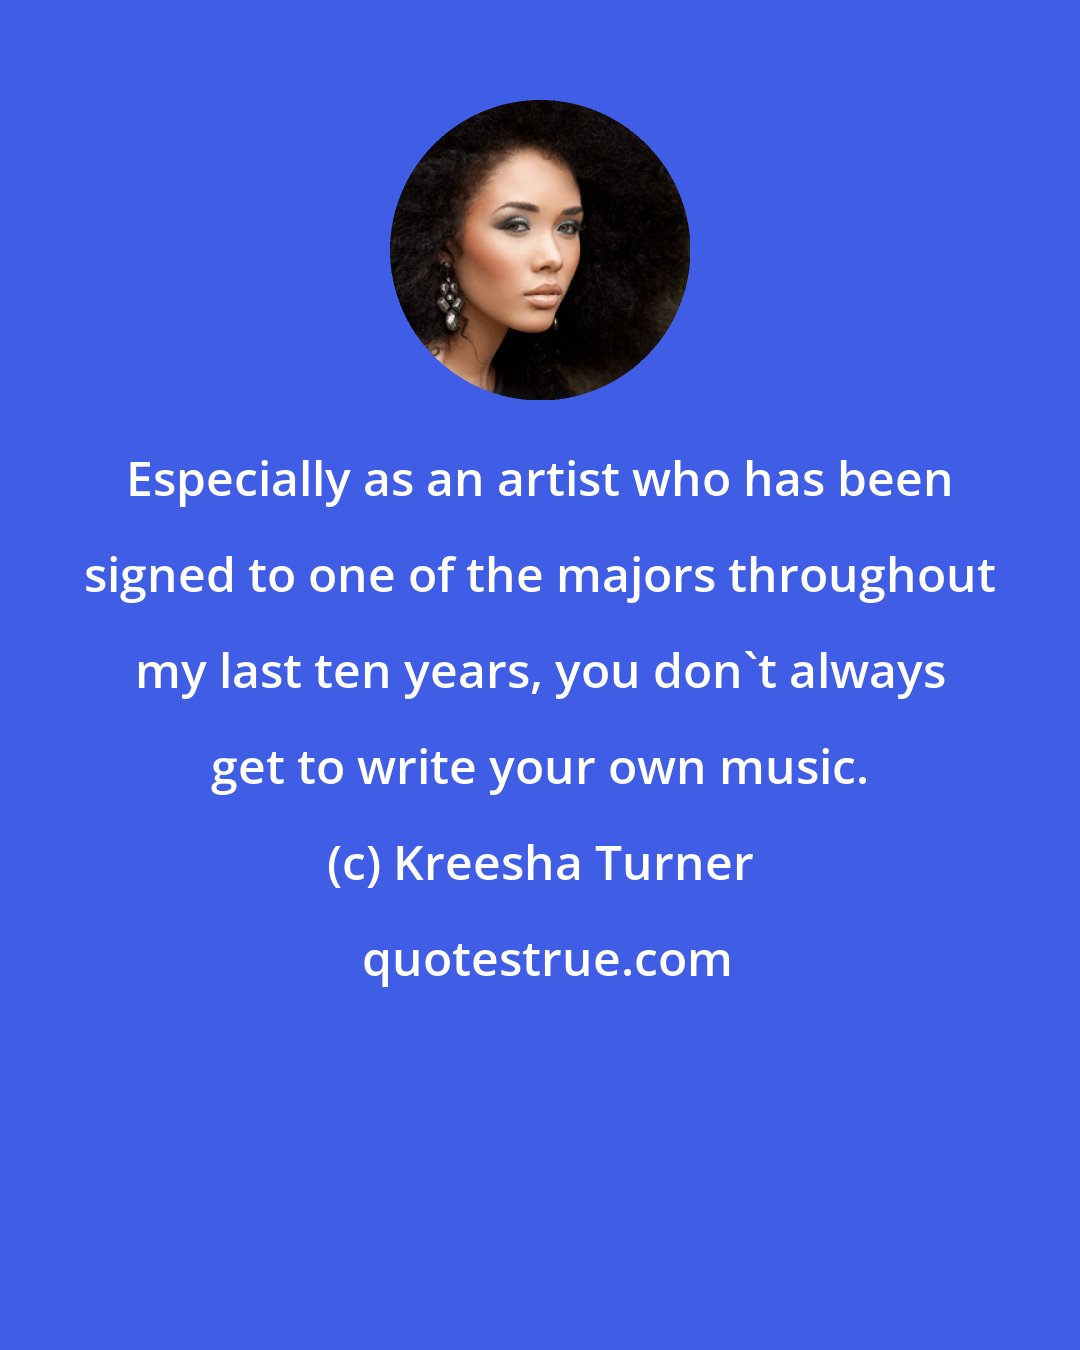 Kreesha Turner: Especially as an artist who has been signed to one of the majors throughout my last ten years, you don't always get to write your own music.